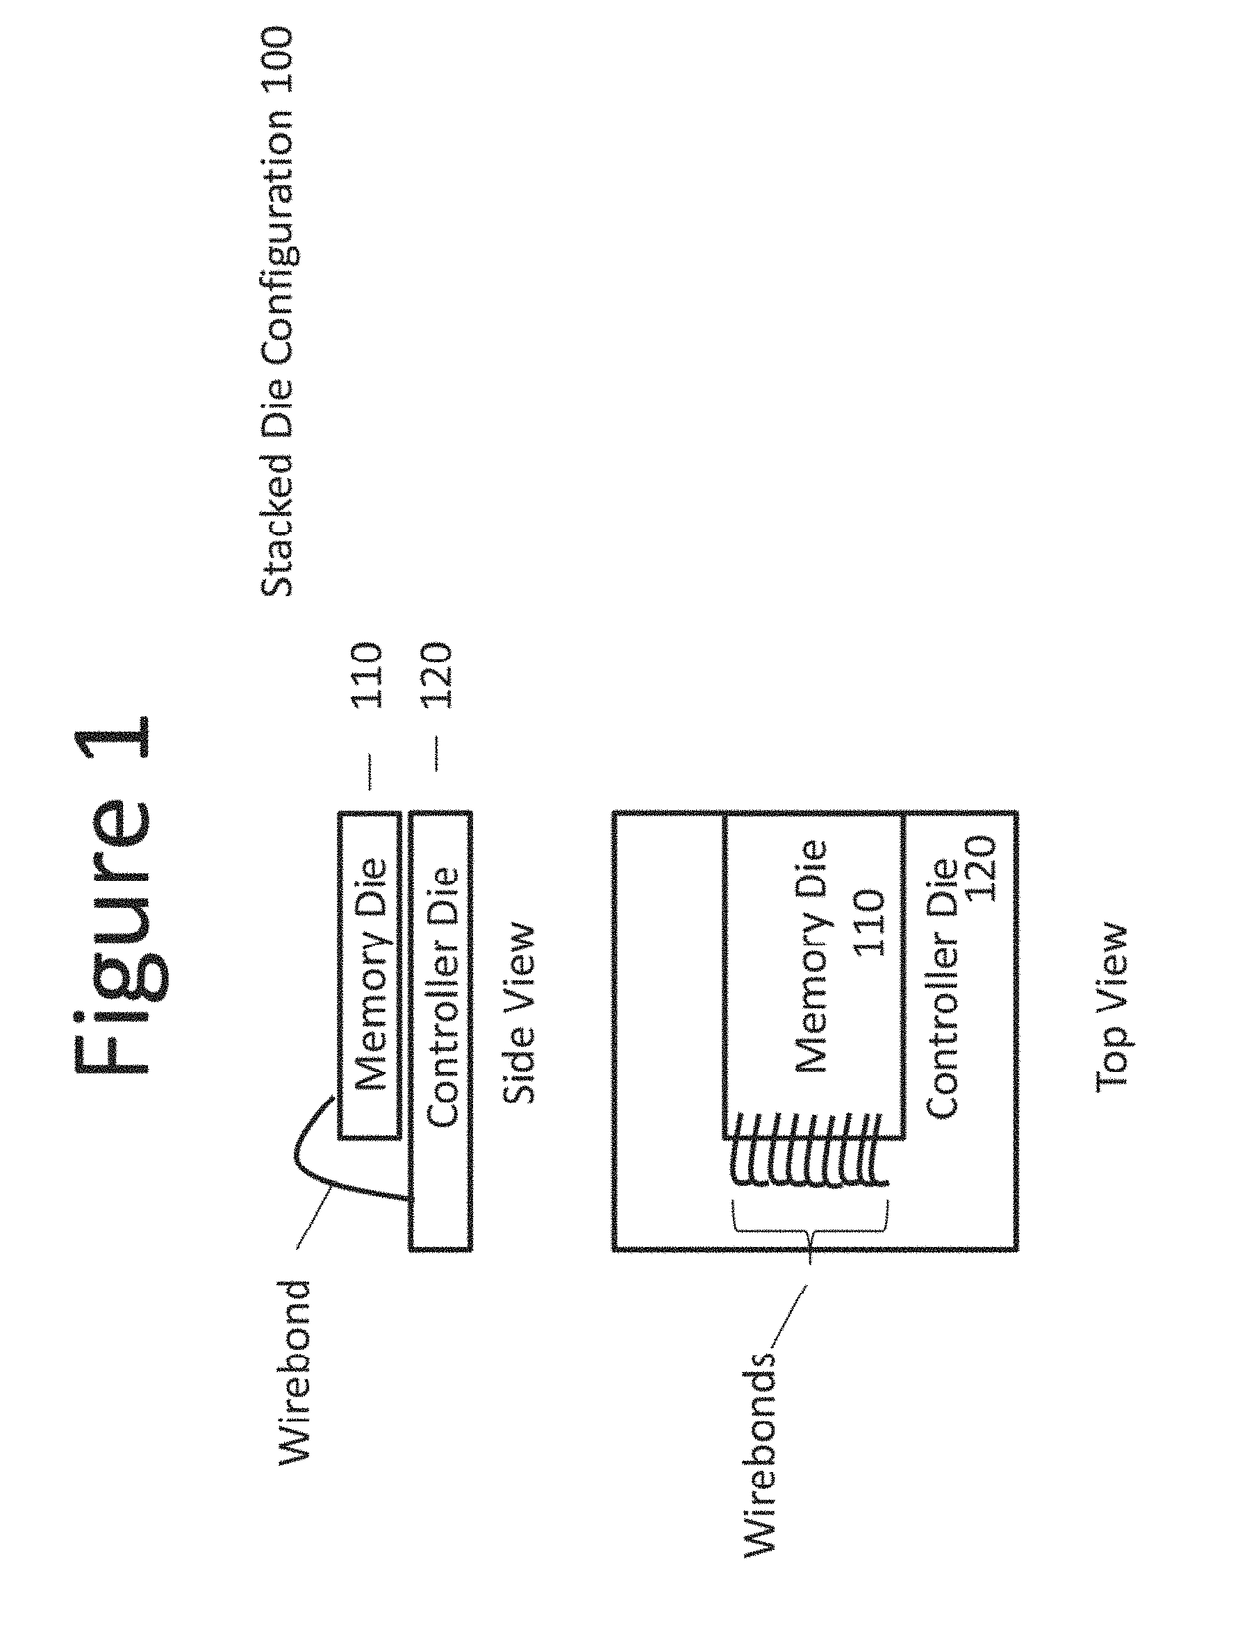 Low-pincount high-bandwidth memory and memory bus